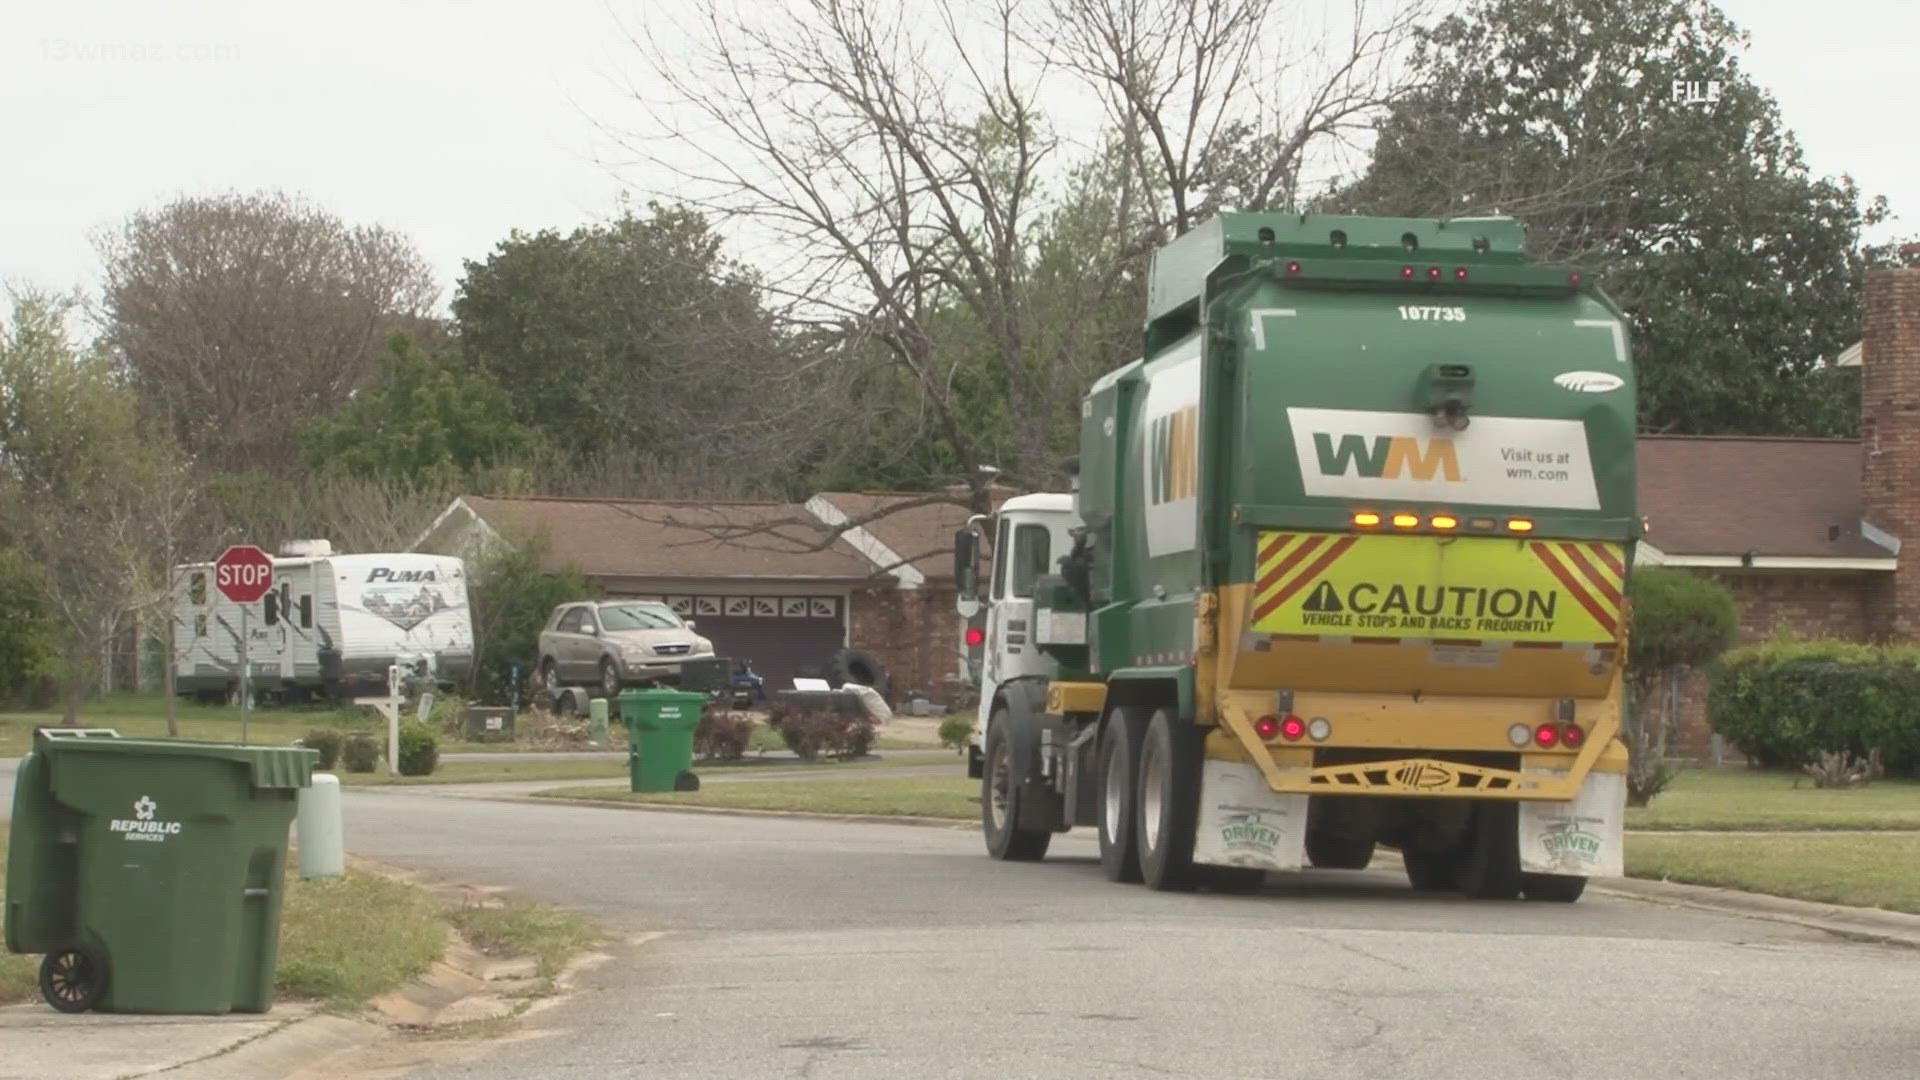 Houston County Commissioners voted to replace "Waste Management" with "Ryland Environmental" for waste disposal.